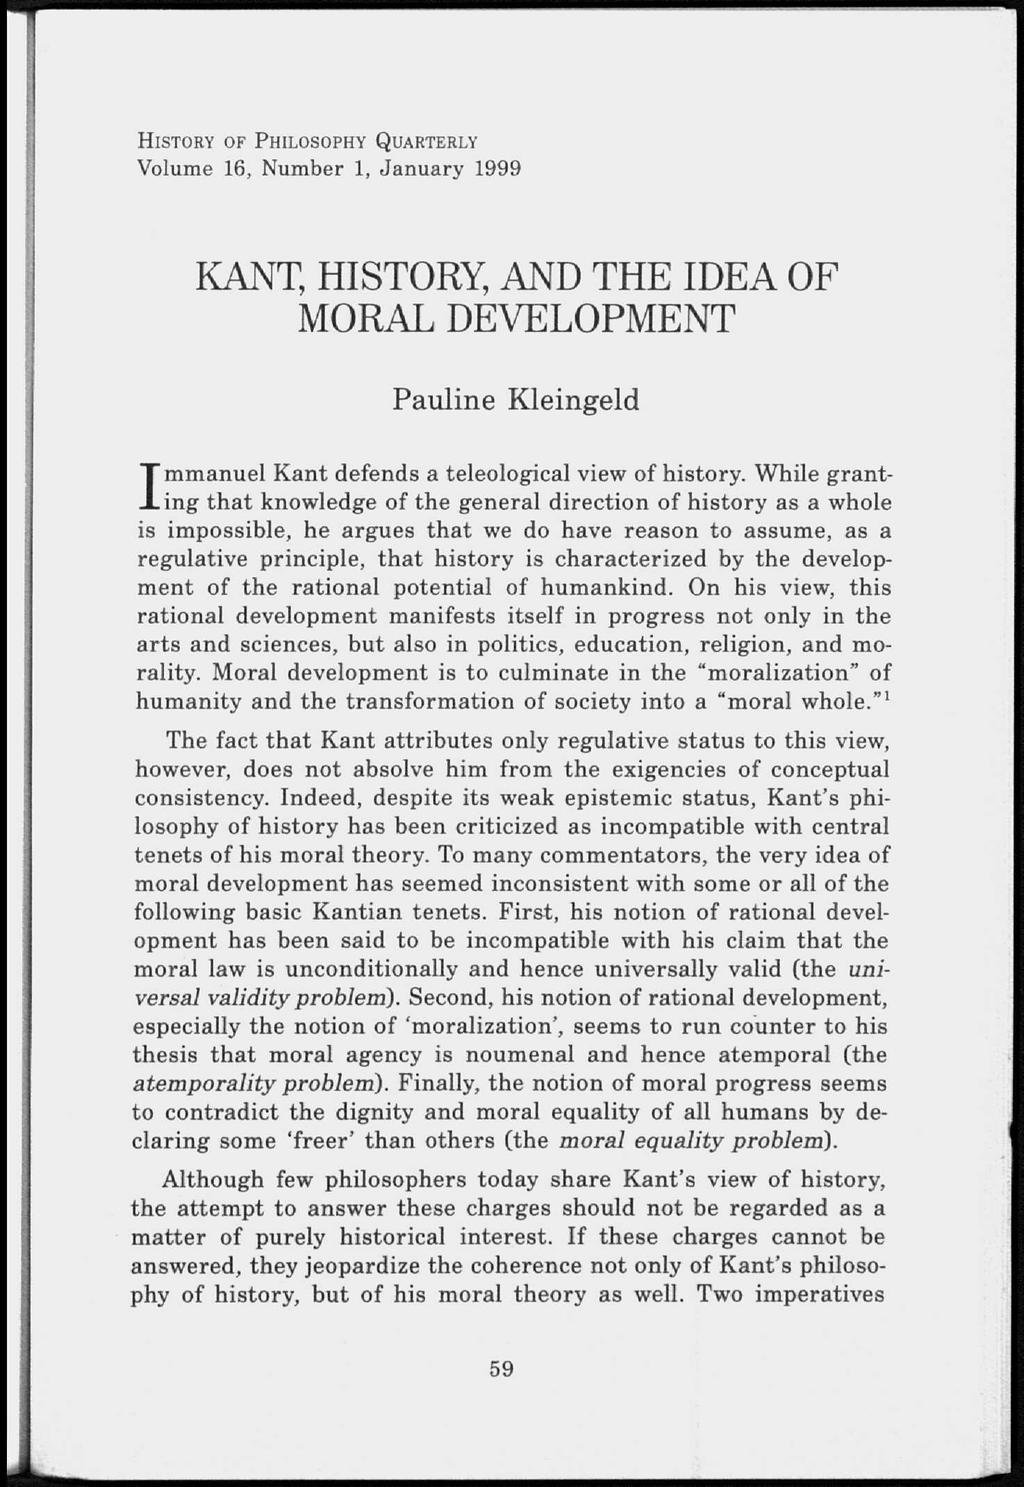 HISTORY OF PHILOSOPHY QUARTERLY Volume 16, Number 1, January 1999 KANT, HISTORY, AND THE IDEA OF MORAL DEVELOPMENT Pauline Kleingeld Immanuel Kant defends a teleological view of history.